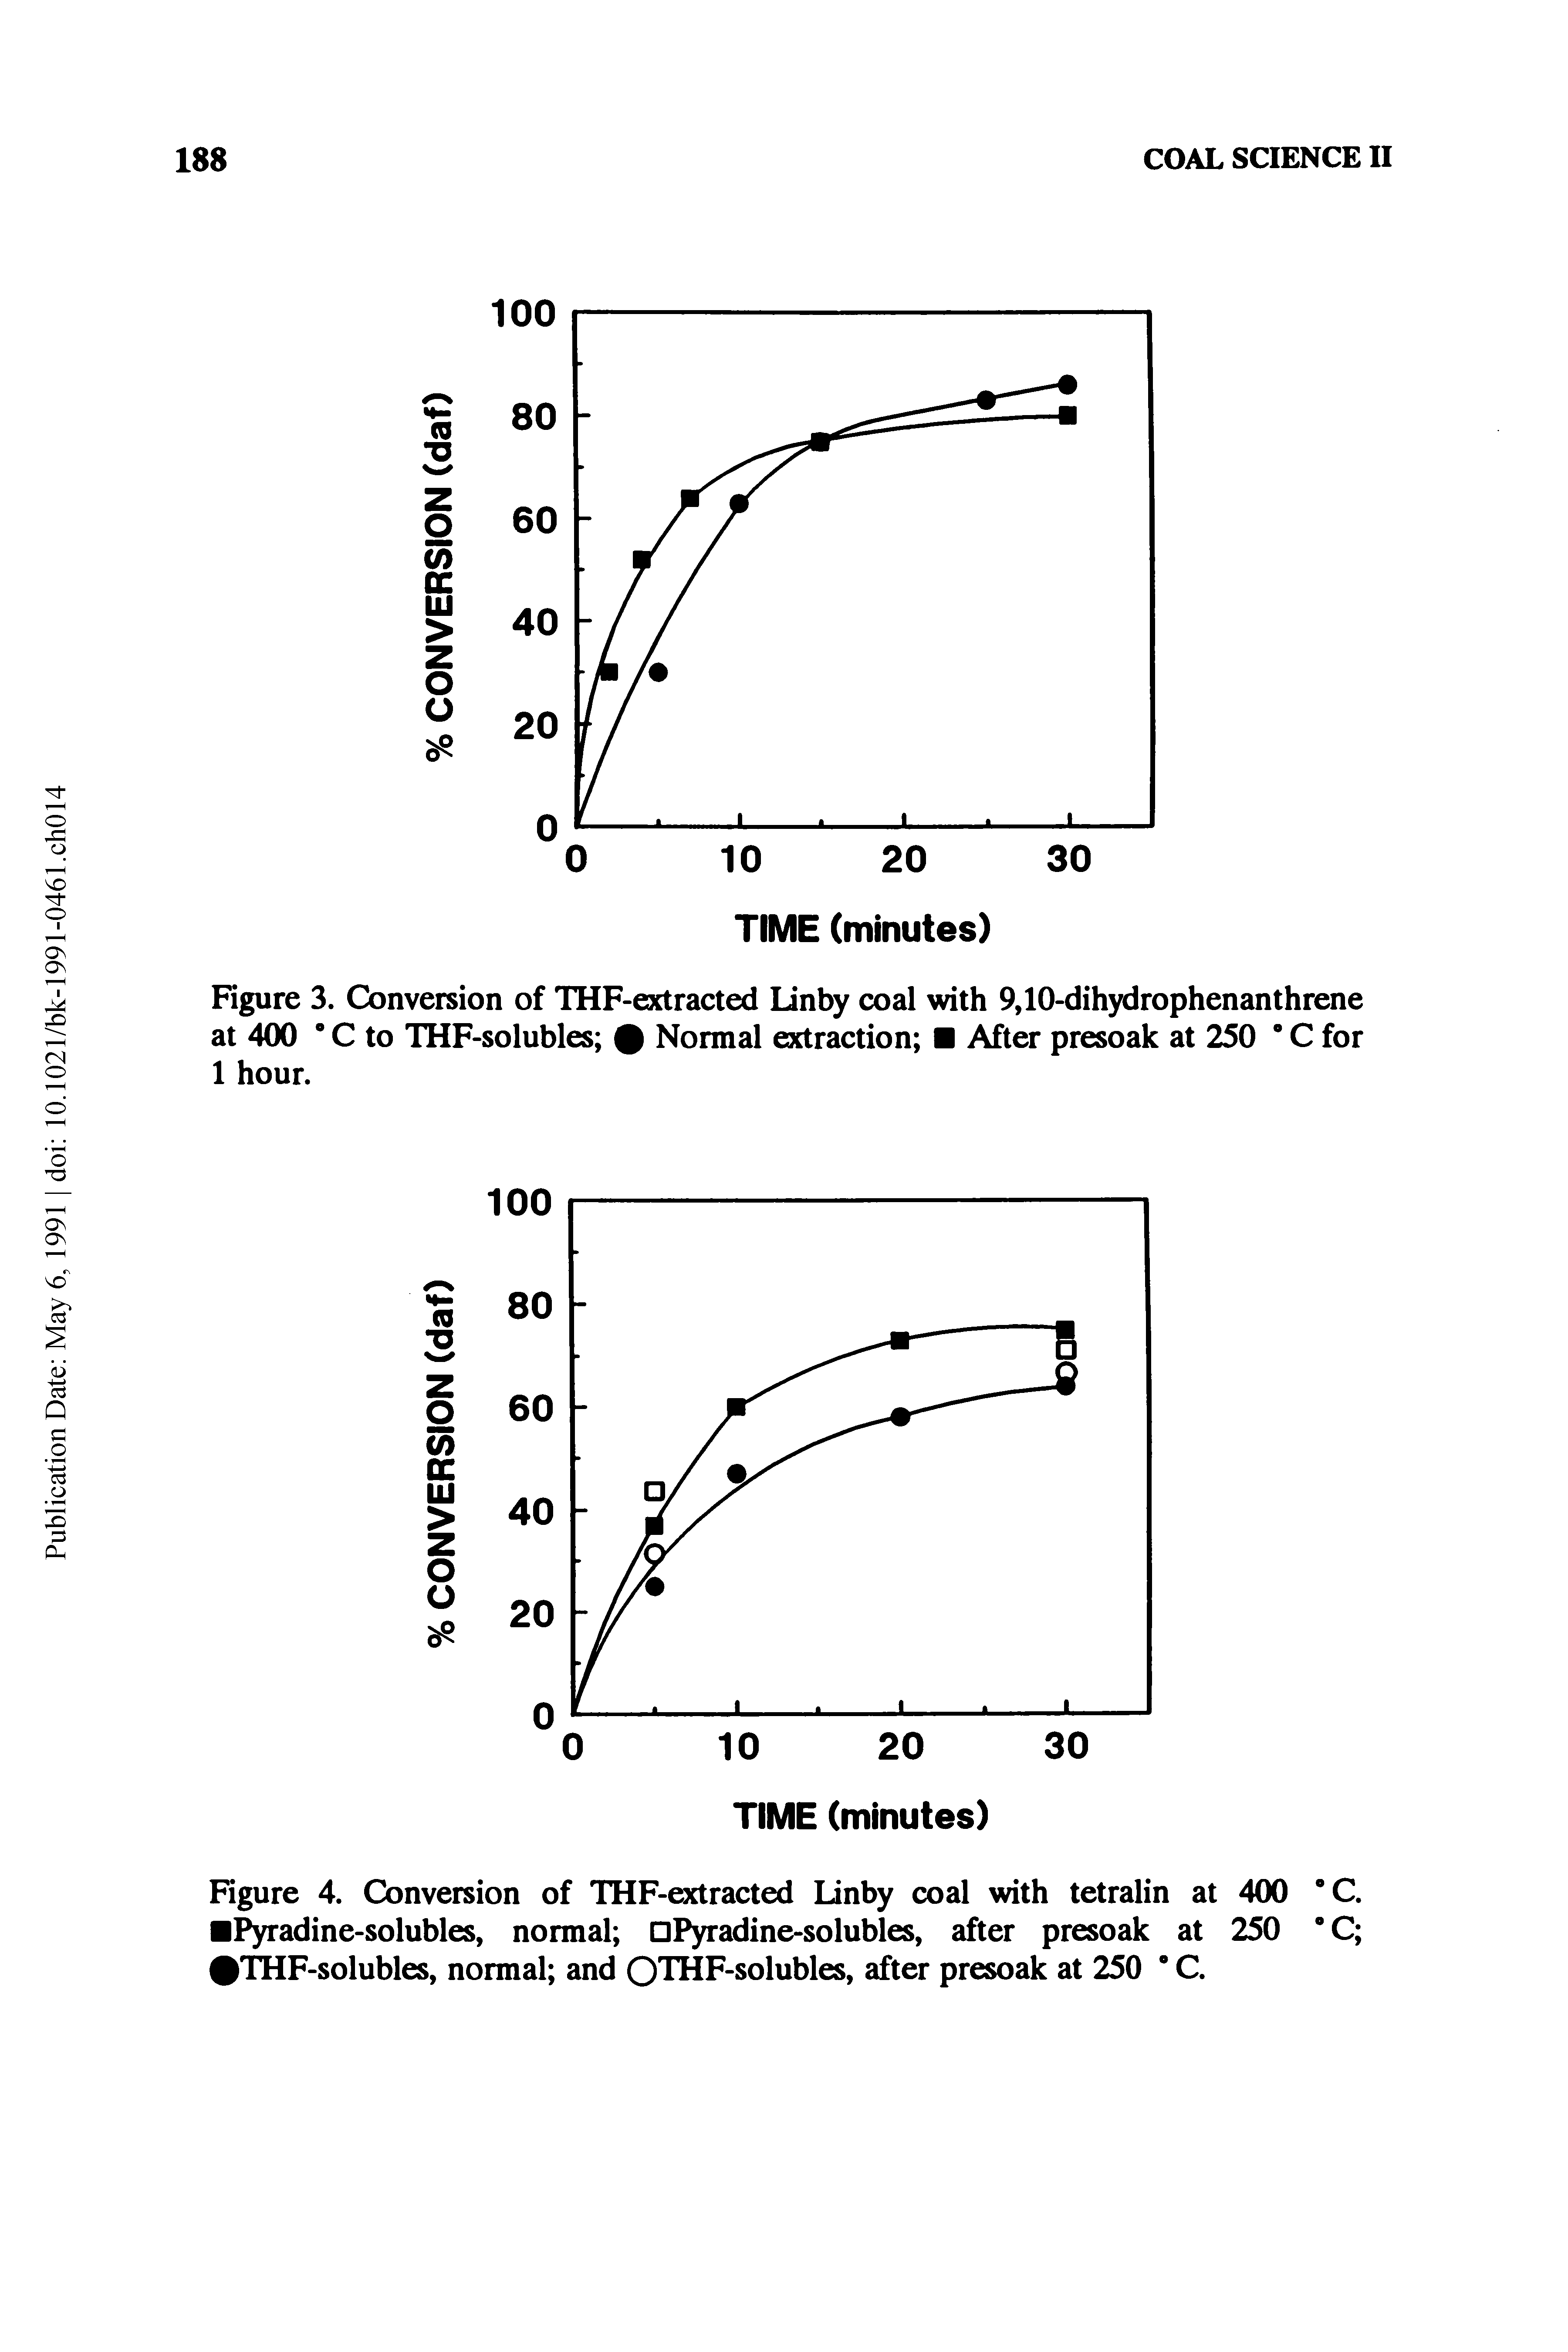 Figure 3. Conversion of THF-extracted Linby coal with 9,10-dihydrophenanthrene at 400 " C to THF-solubles % Normal extraction After presoak at 250 " C for 1 hour.